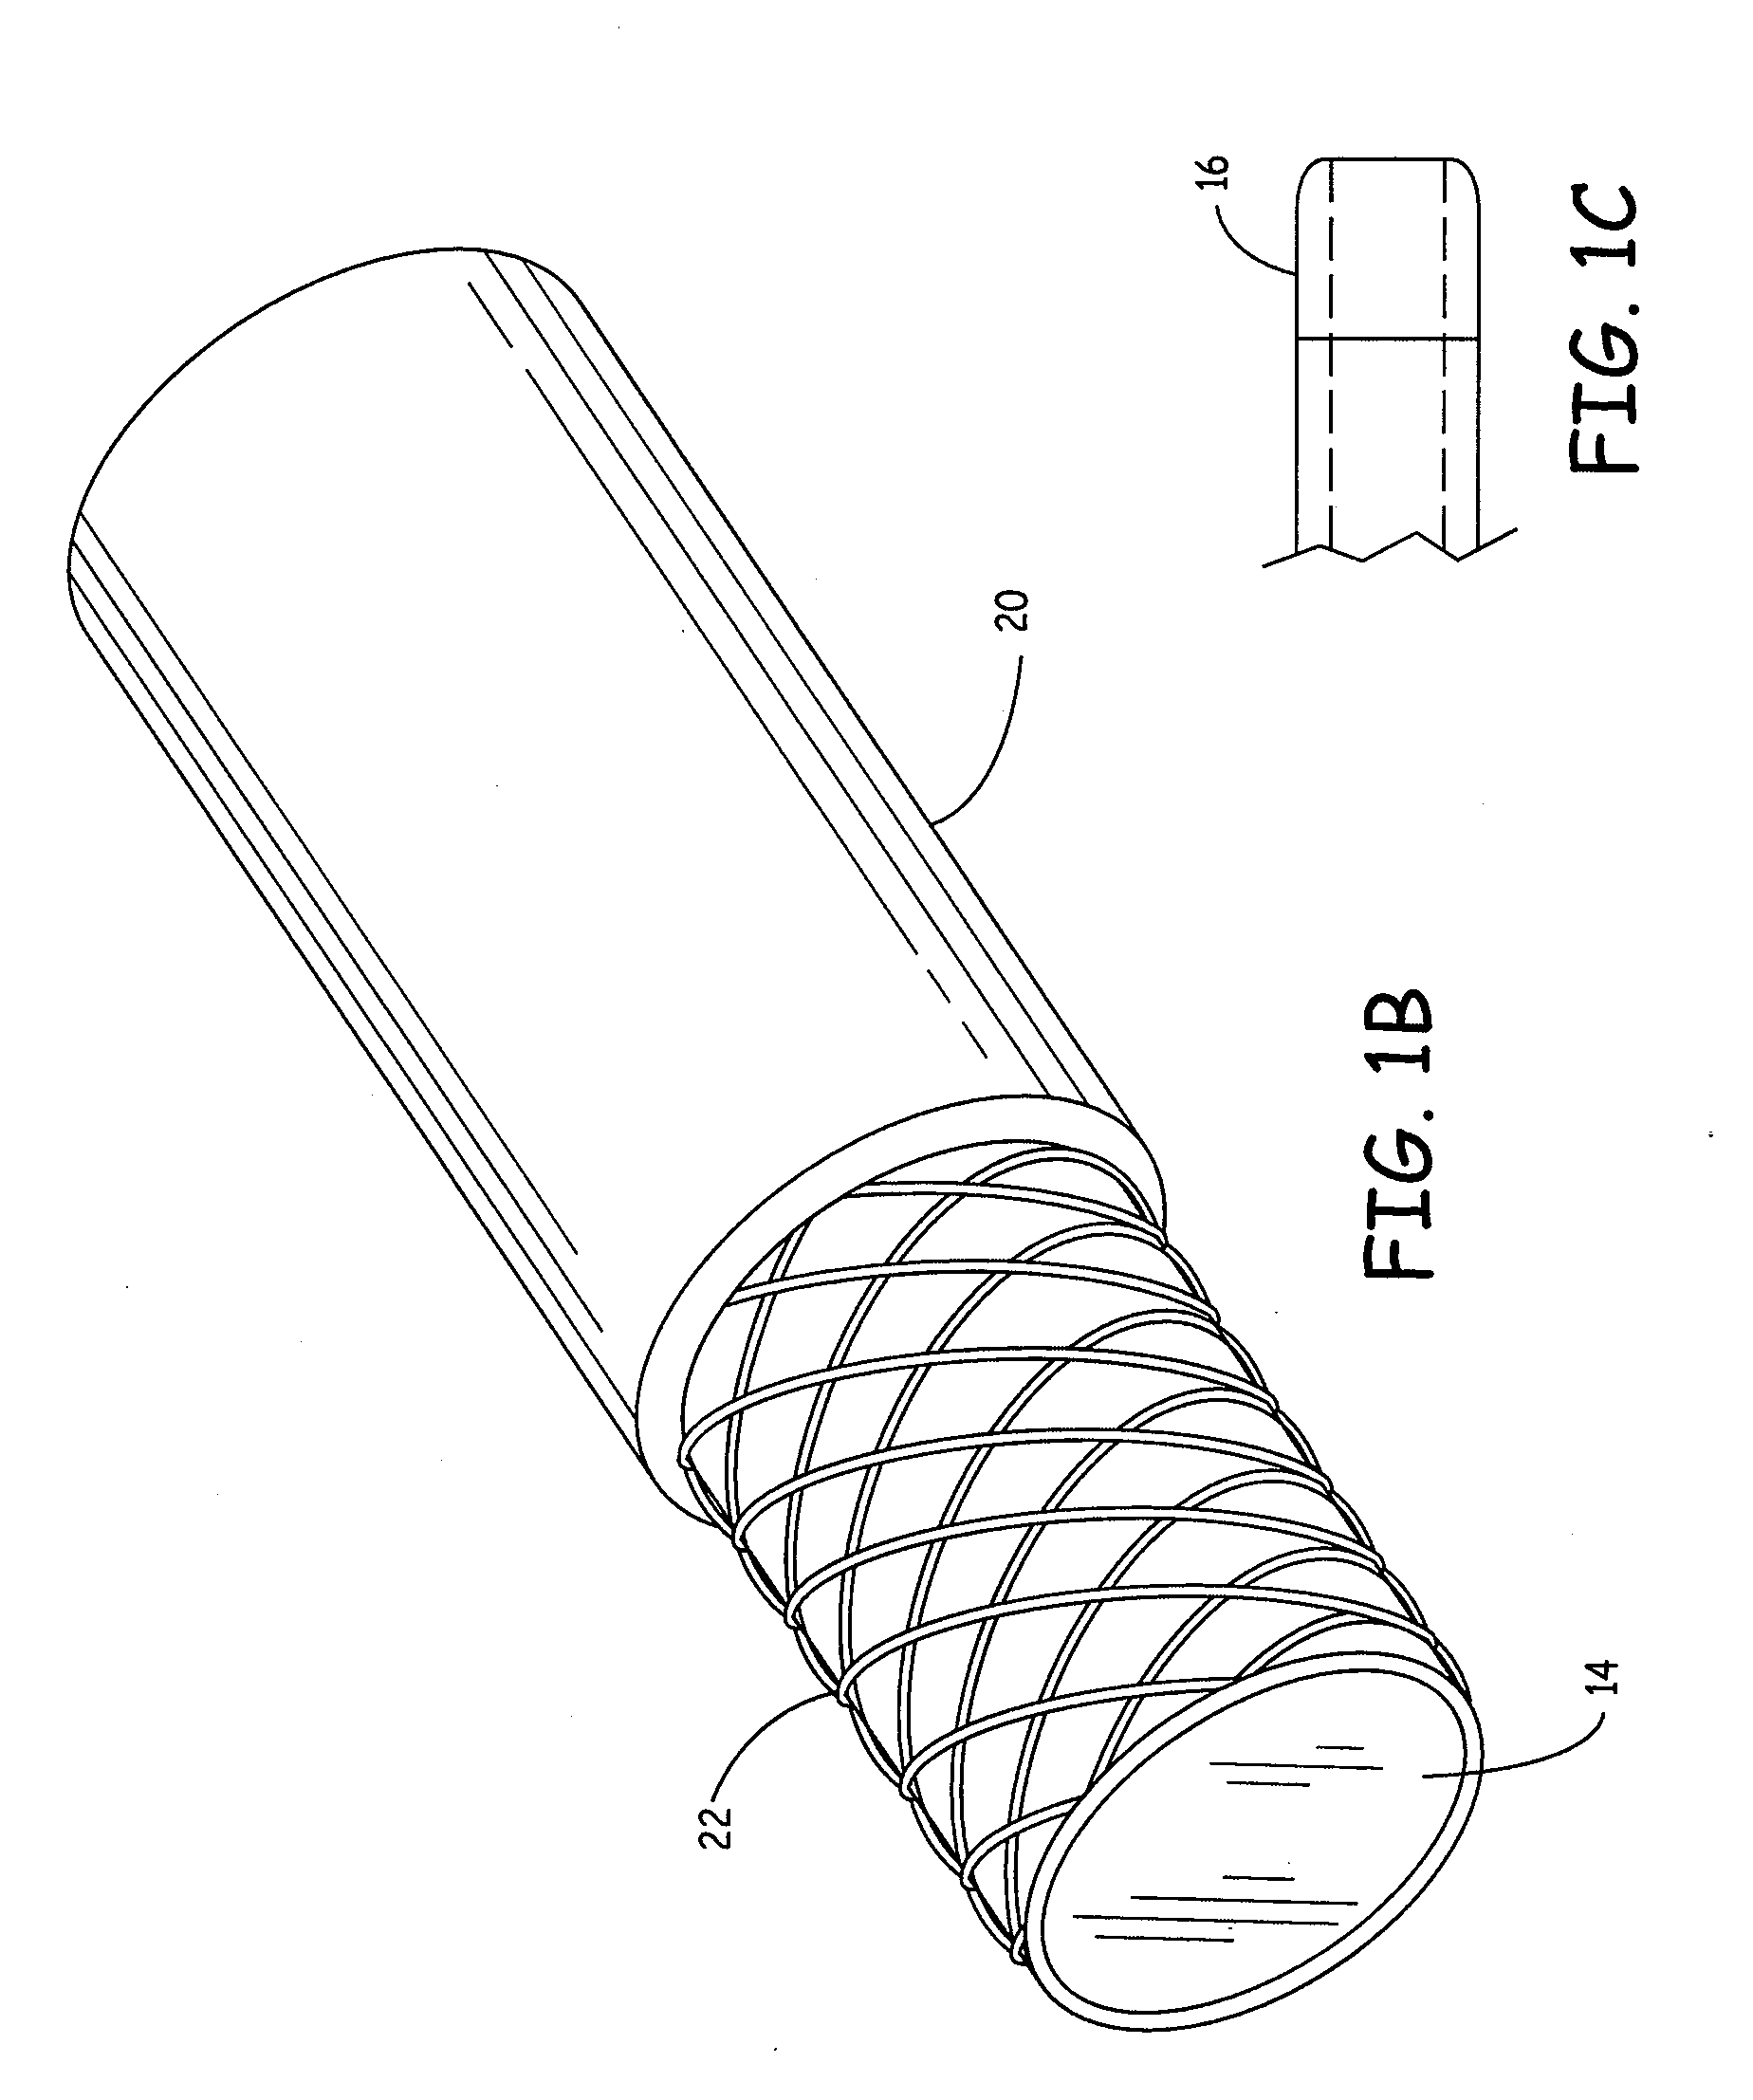 System and method for treating septal defects